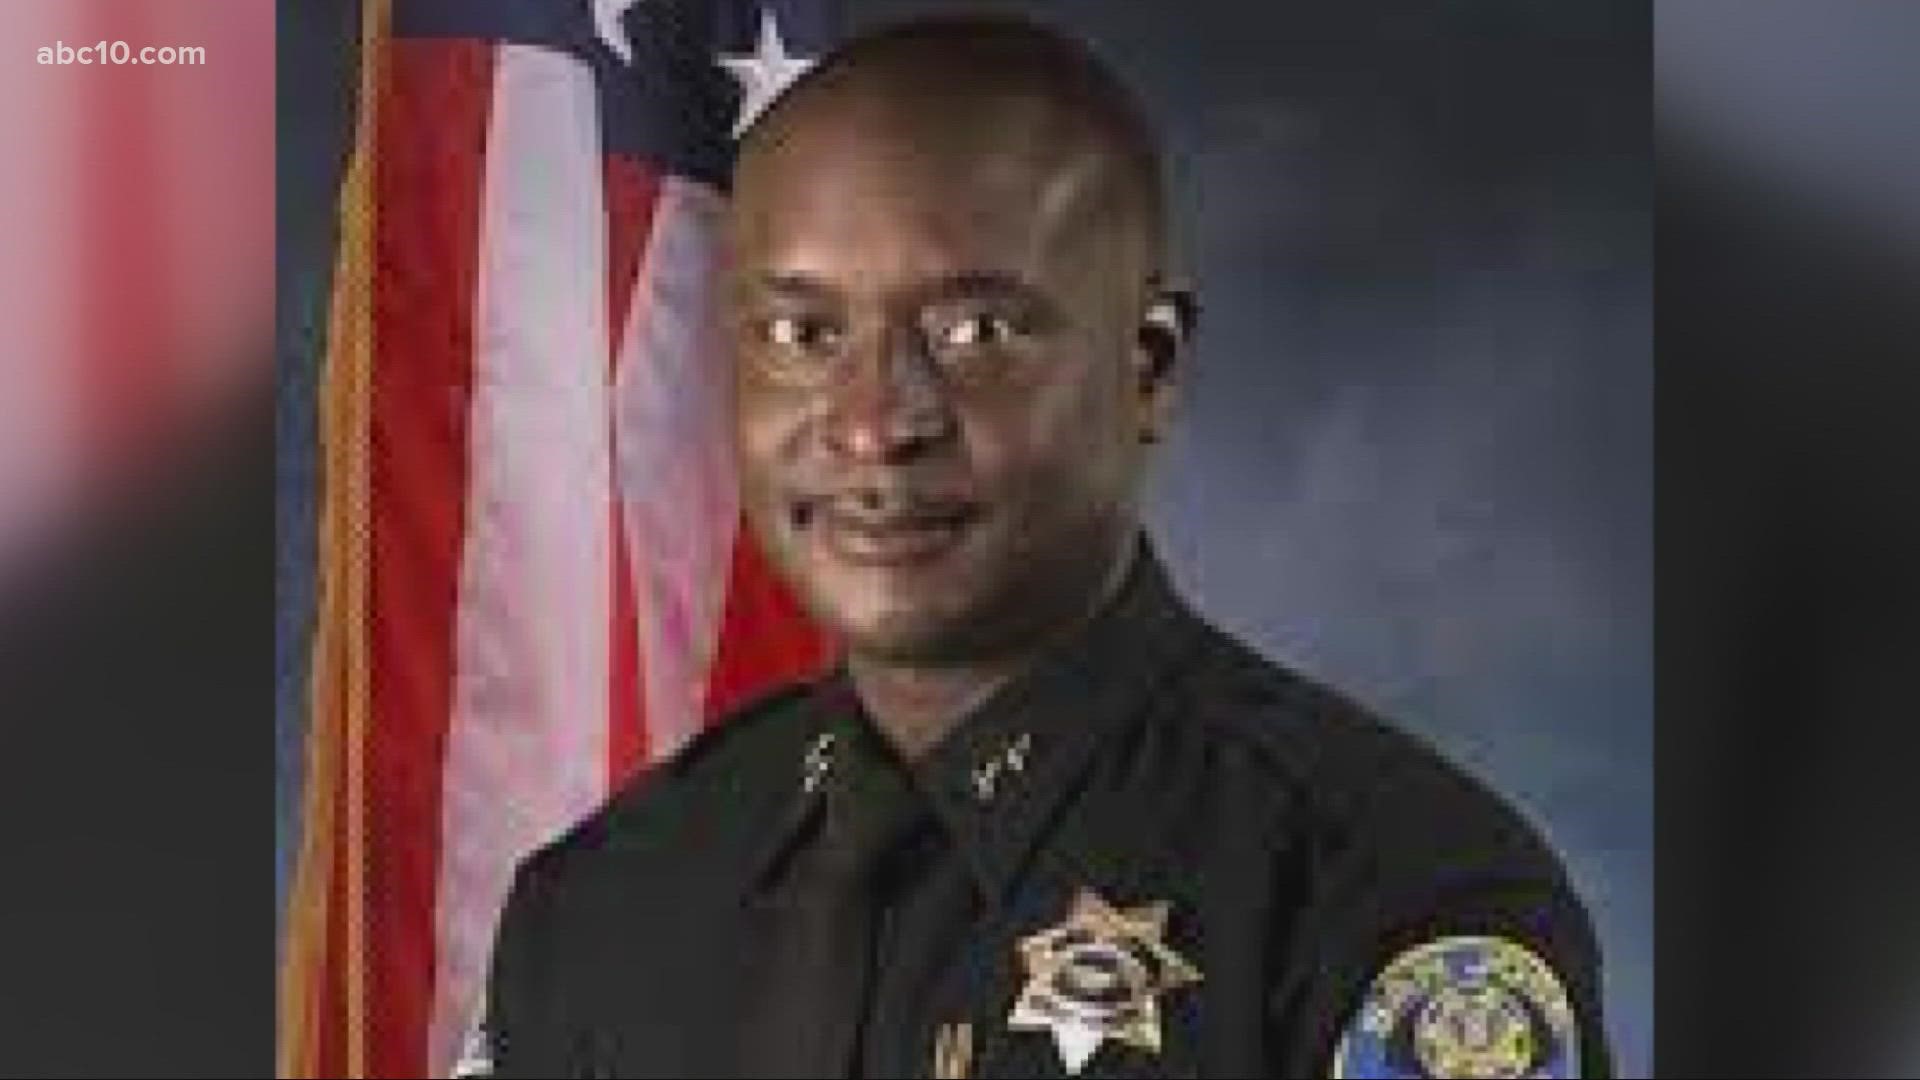 McFadden will take the helm of the Stockton Police Department on June 1, succeeding former Chief Eric Jones who resigned after a decade-long tenure.